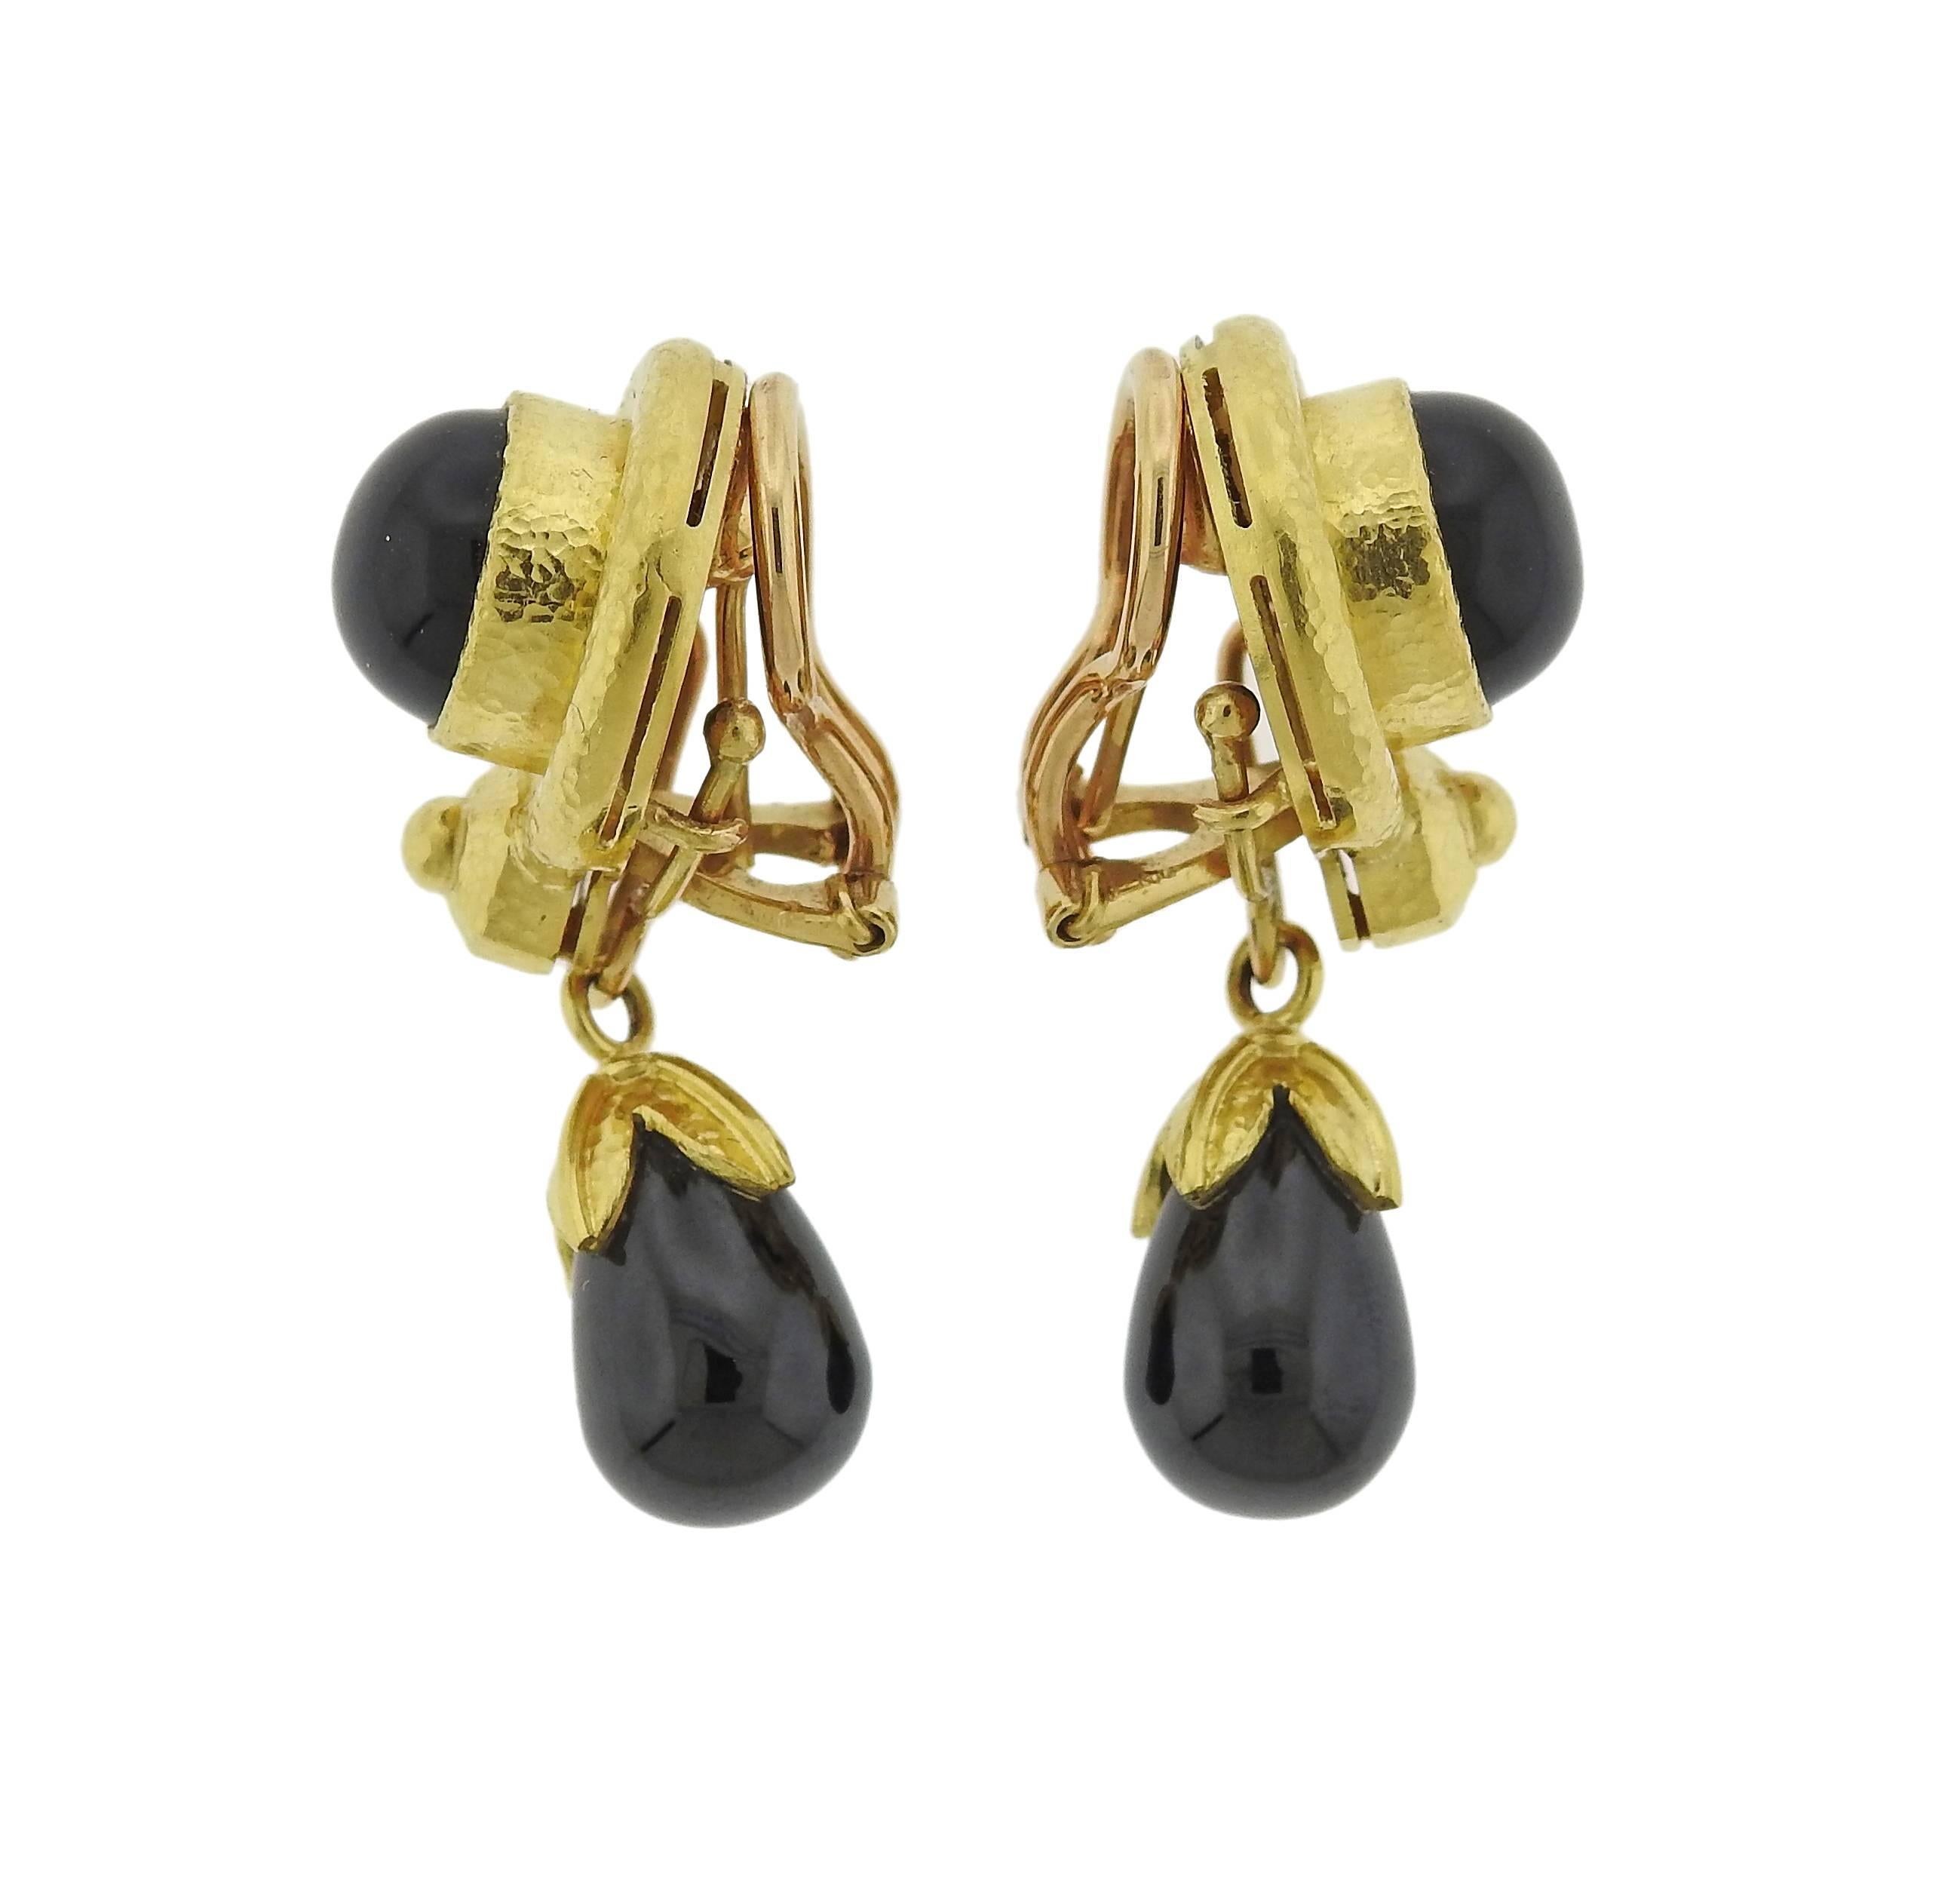 Pair of drop earrings, crafted by Elizabeth Locke, set in signature 19k yellow gold, featuring black onyx. Earrings are 36mm x 17mm at widest point. Weight - 23.2 grams. Marked: Locke hallmark, 19k. 